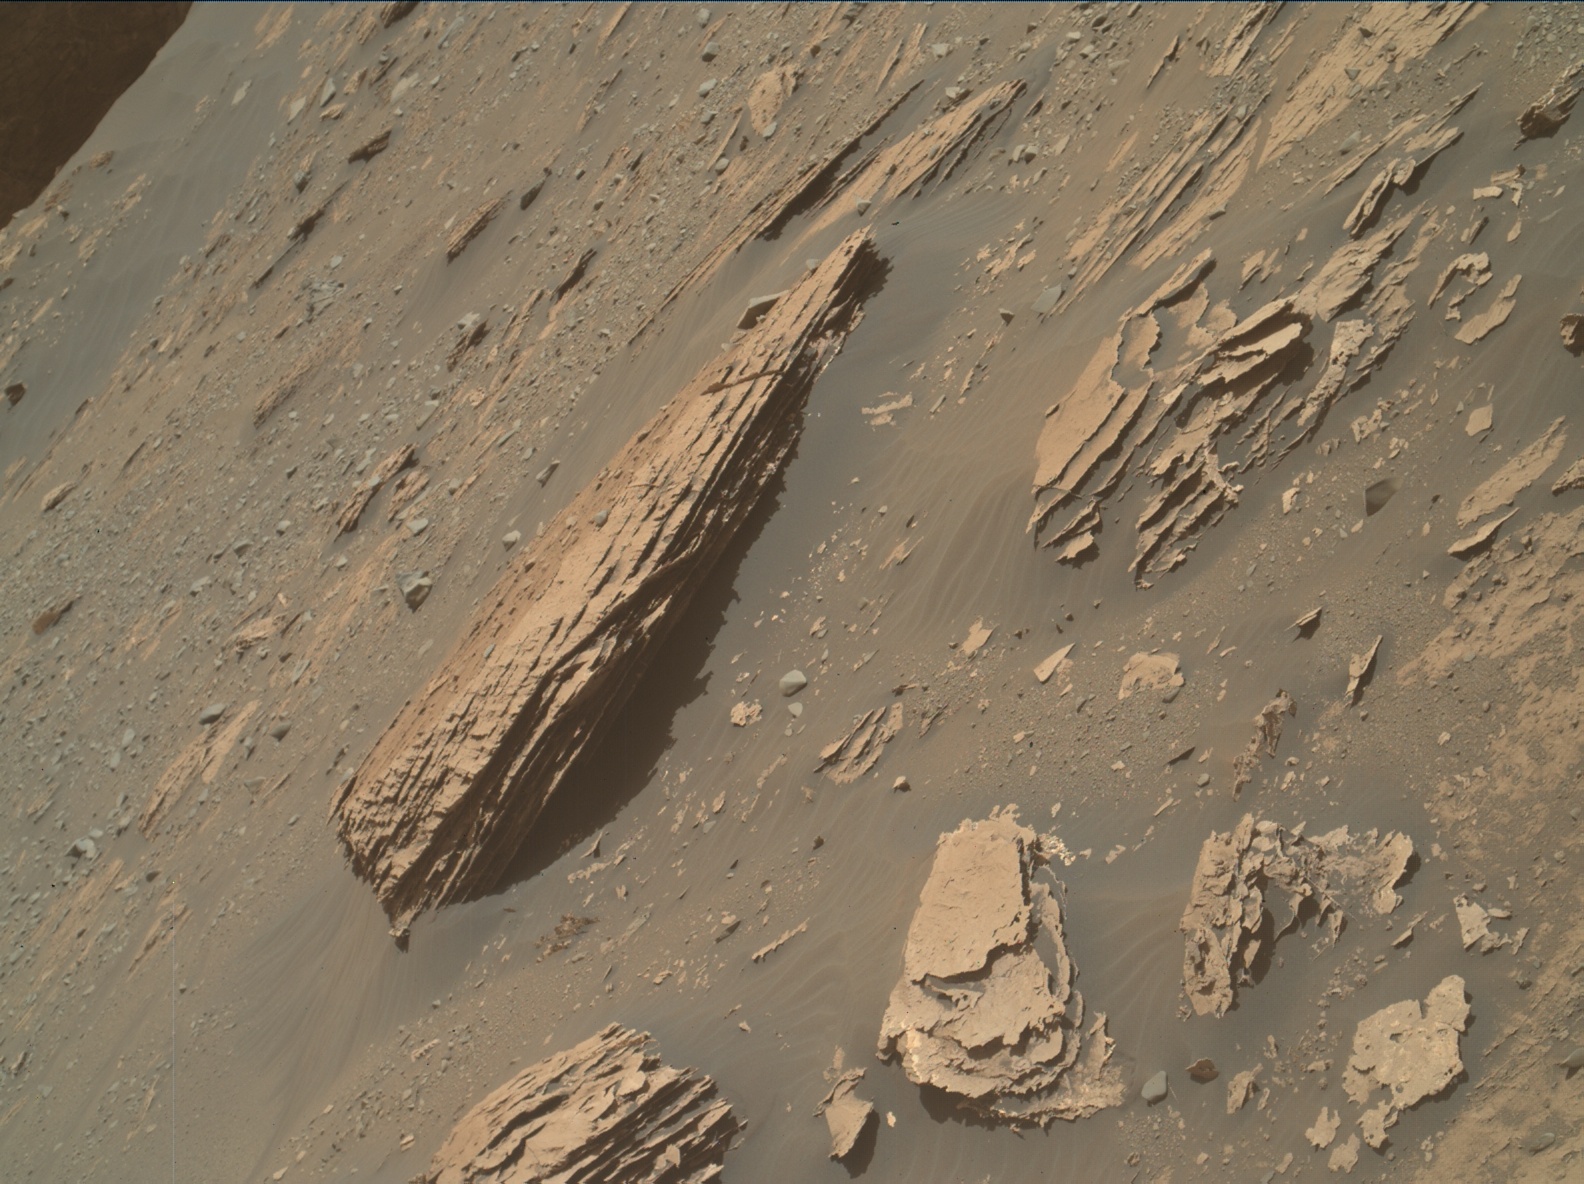 Nasa's Mars rover Curiosity acquired this image using its Mars Hand Lens Imager (MAHLI) on Sol 3303